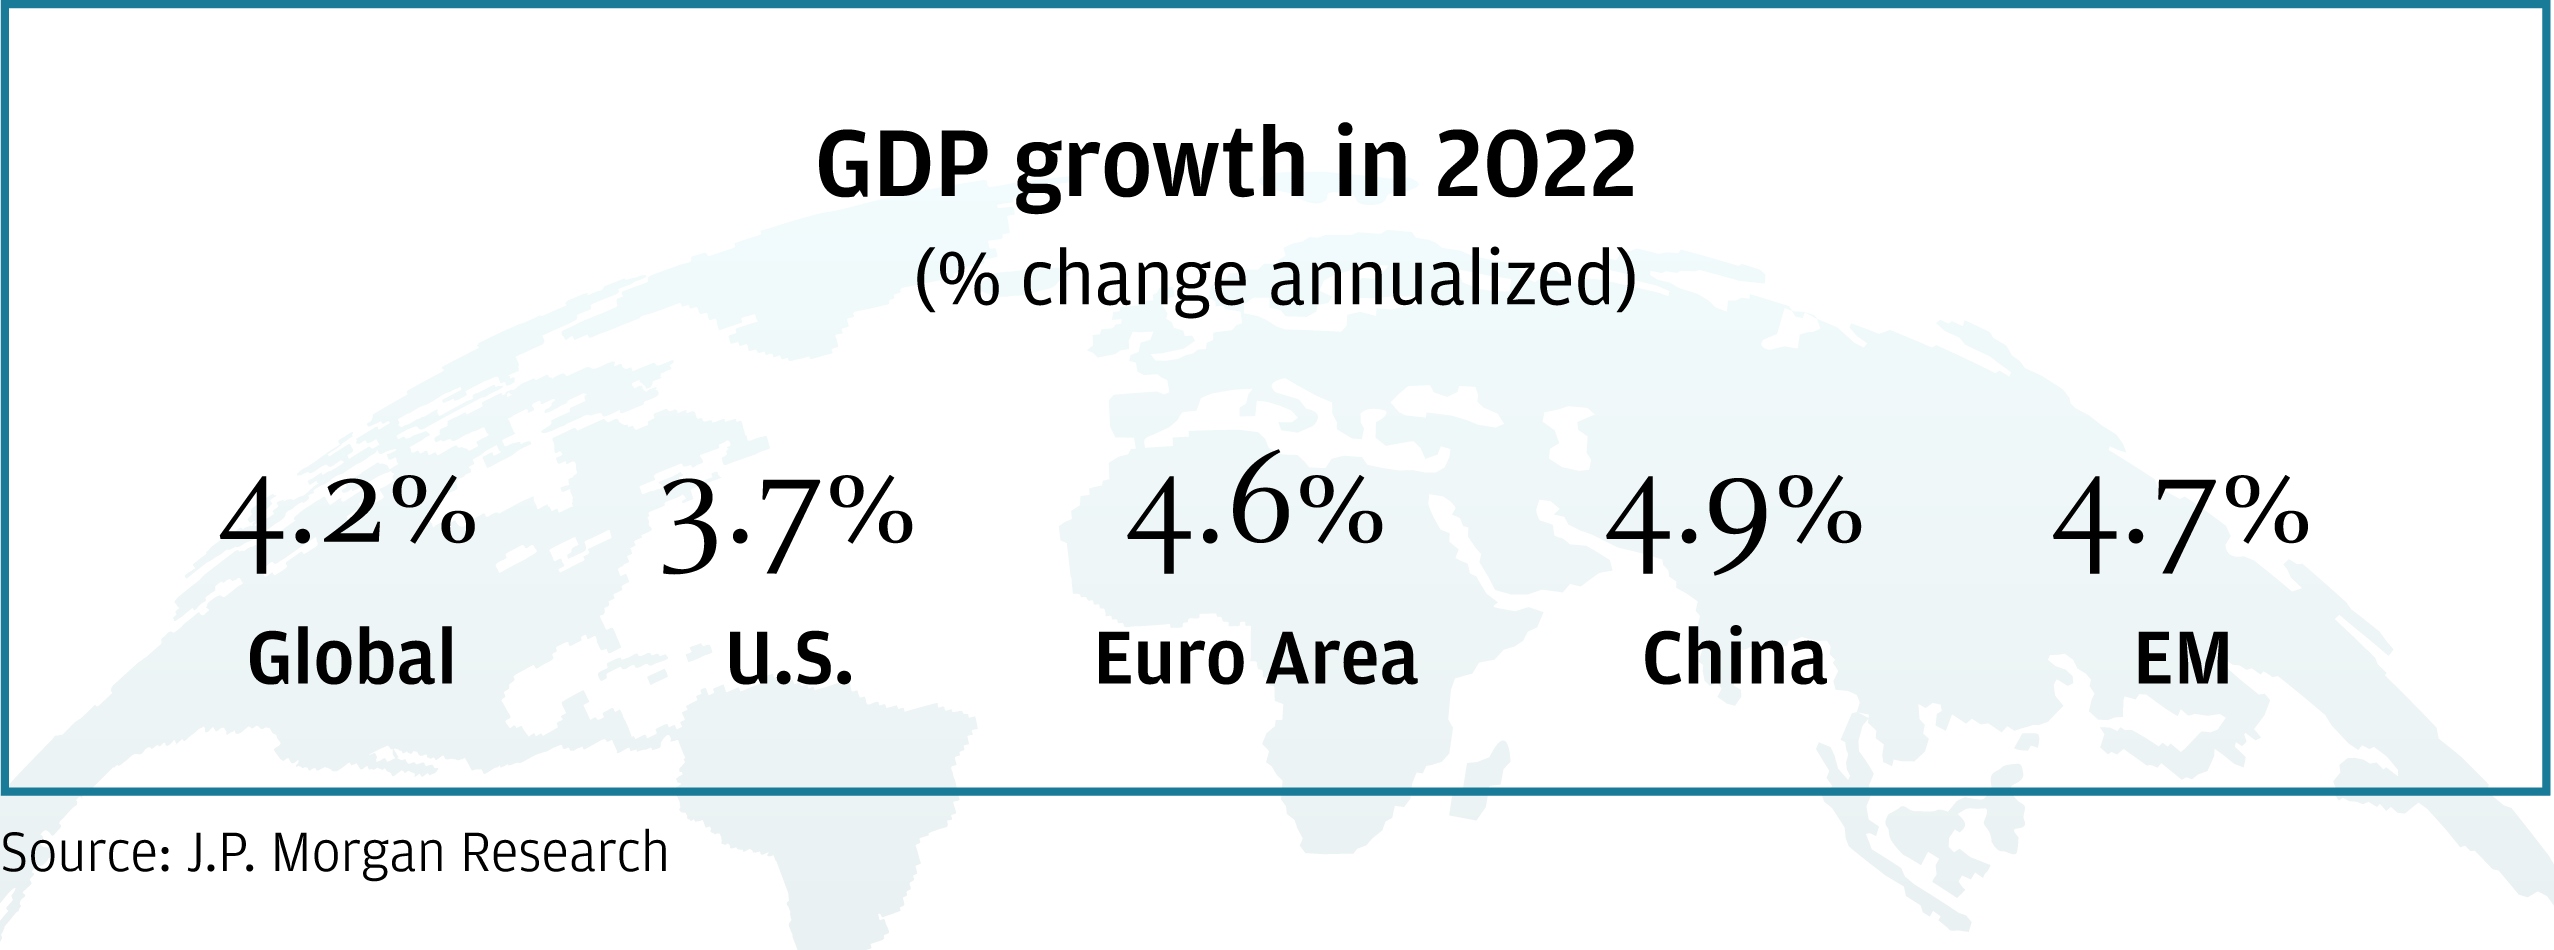 GDP growth in 2022